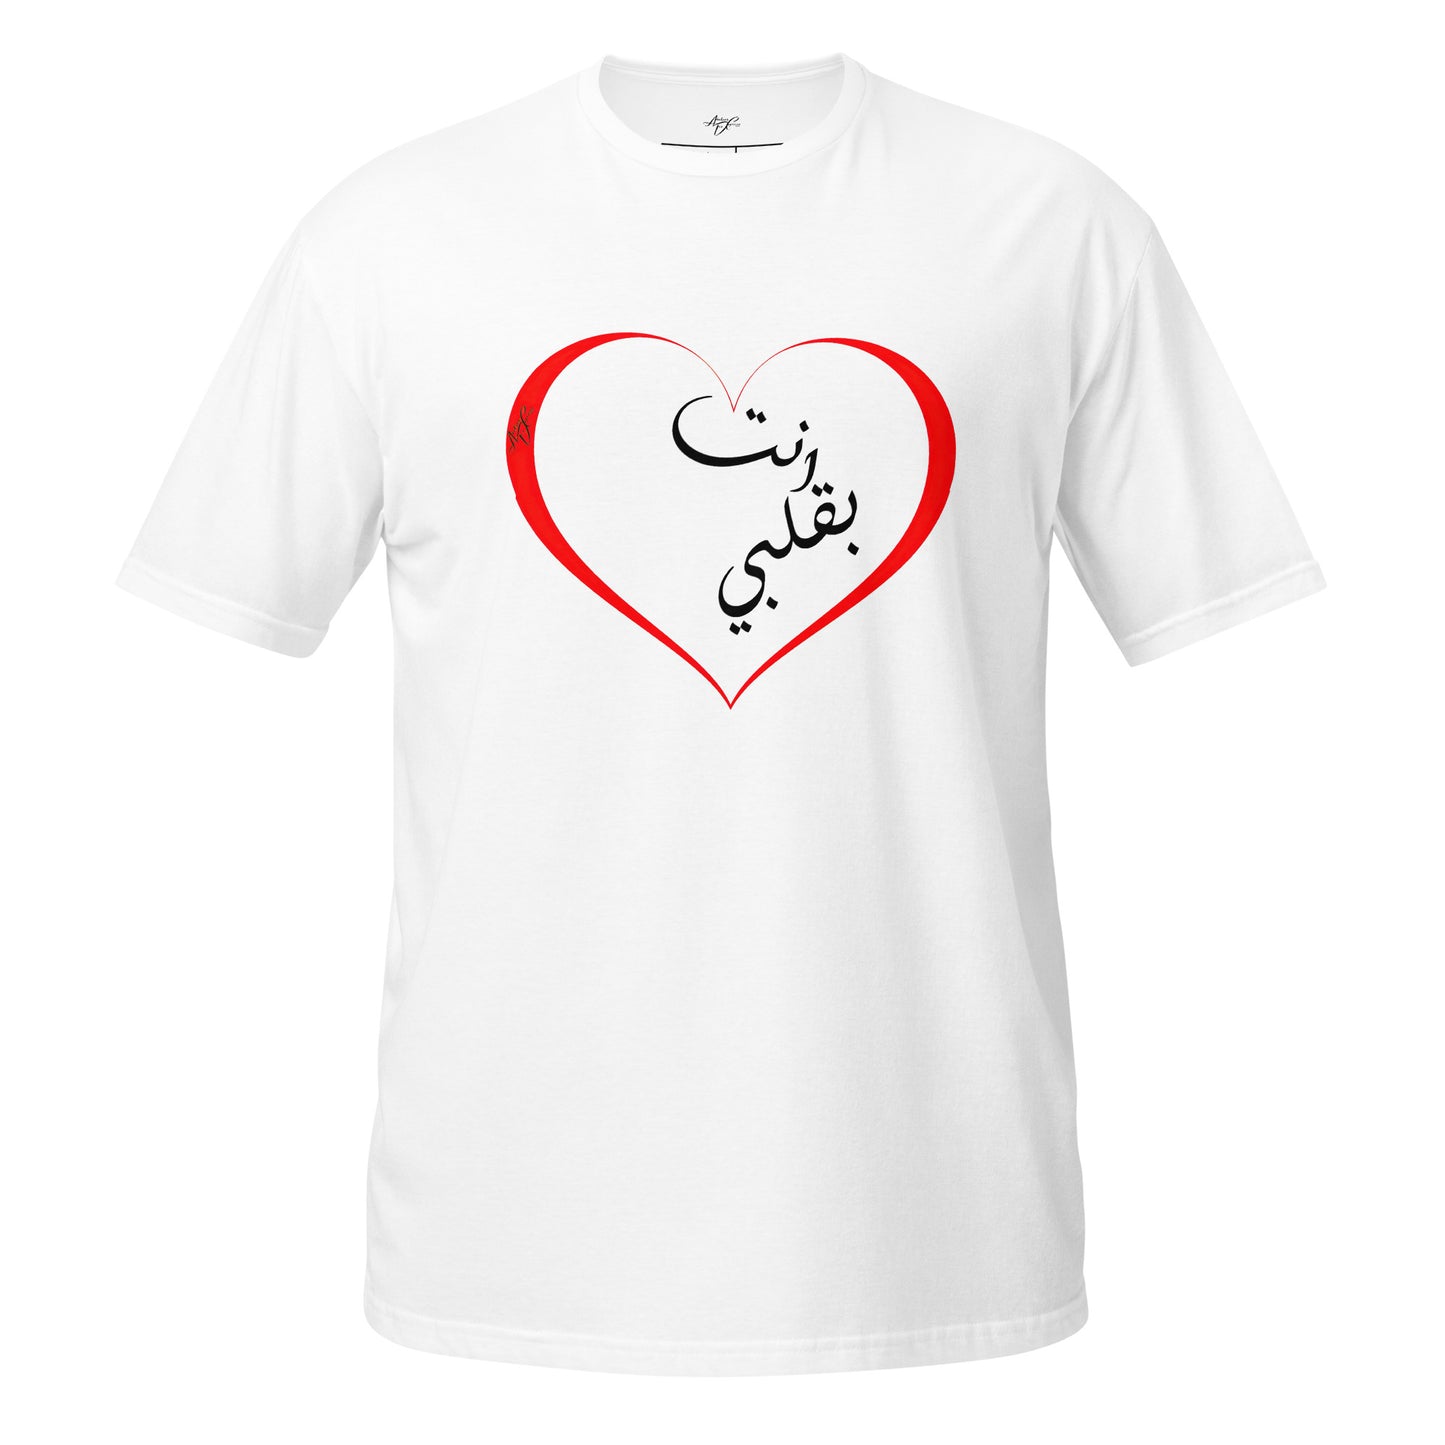 Arabic Calligraphy 'You Are in My Heart' Premium Cotton T-Shirt